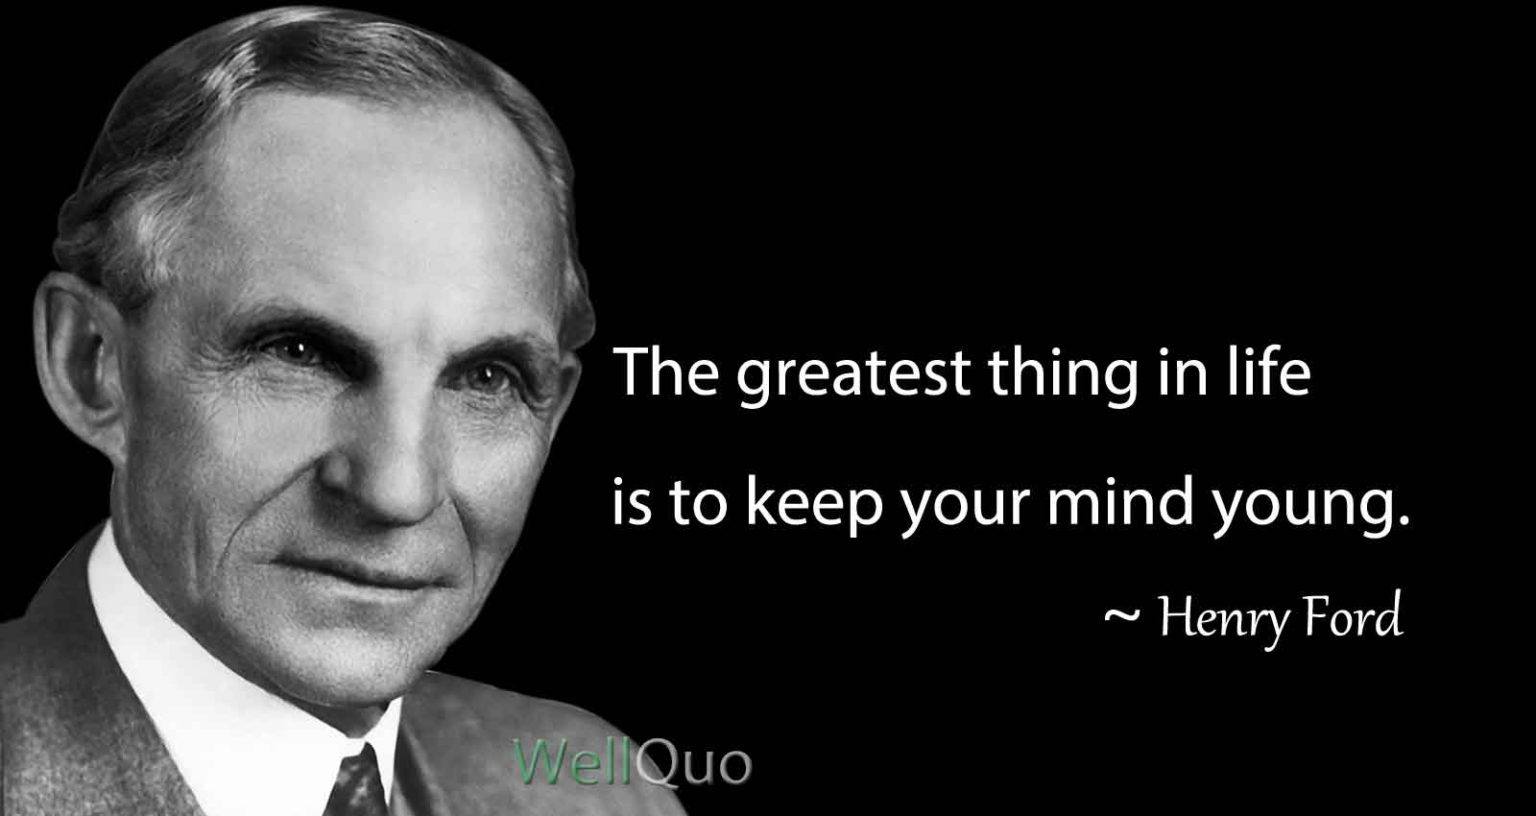 Henry Ford Quotes for Success in Business and Life - Well Quo